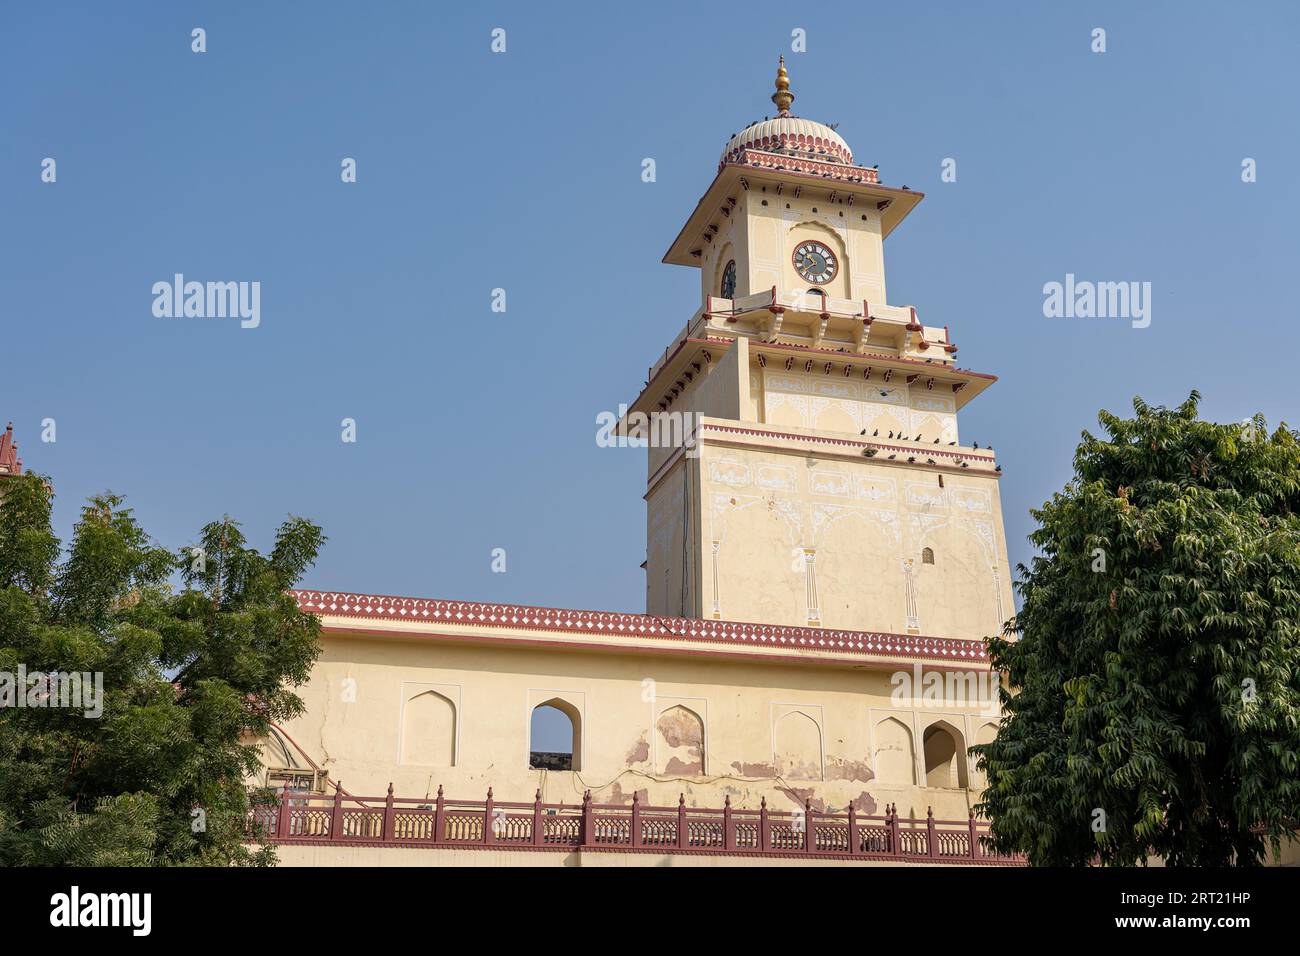 Jaipur, India, December 11, 2019: Exterior view of the clock tower at the City Palace Stock Photo